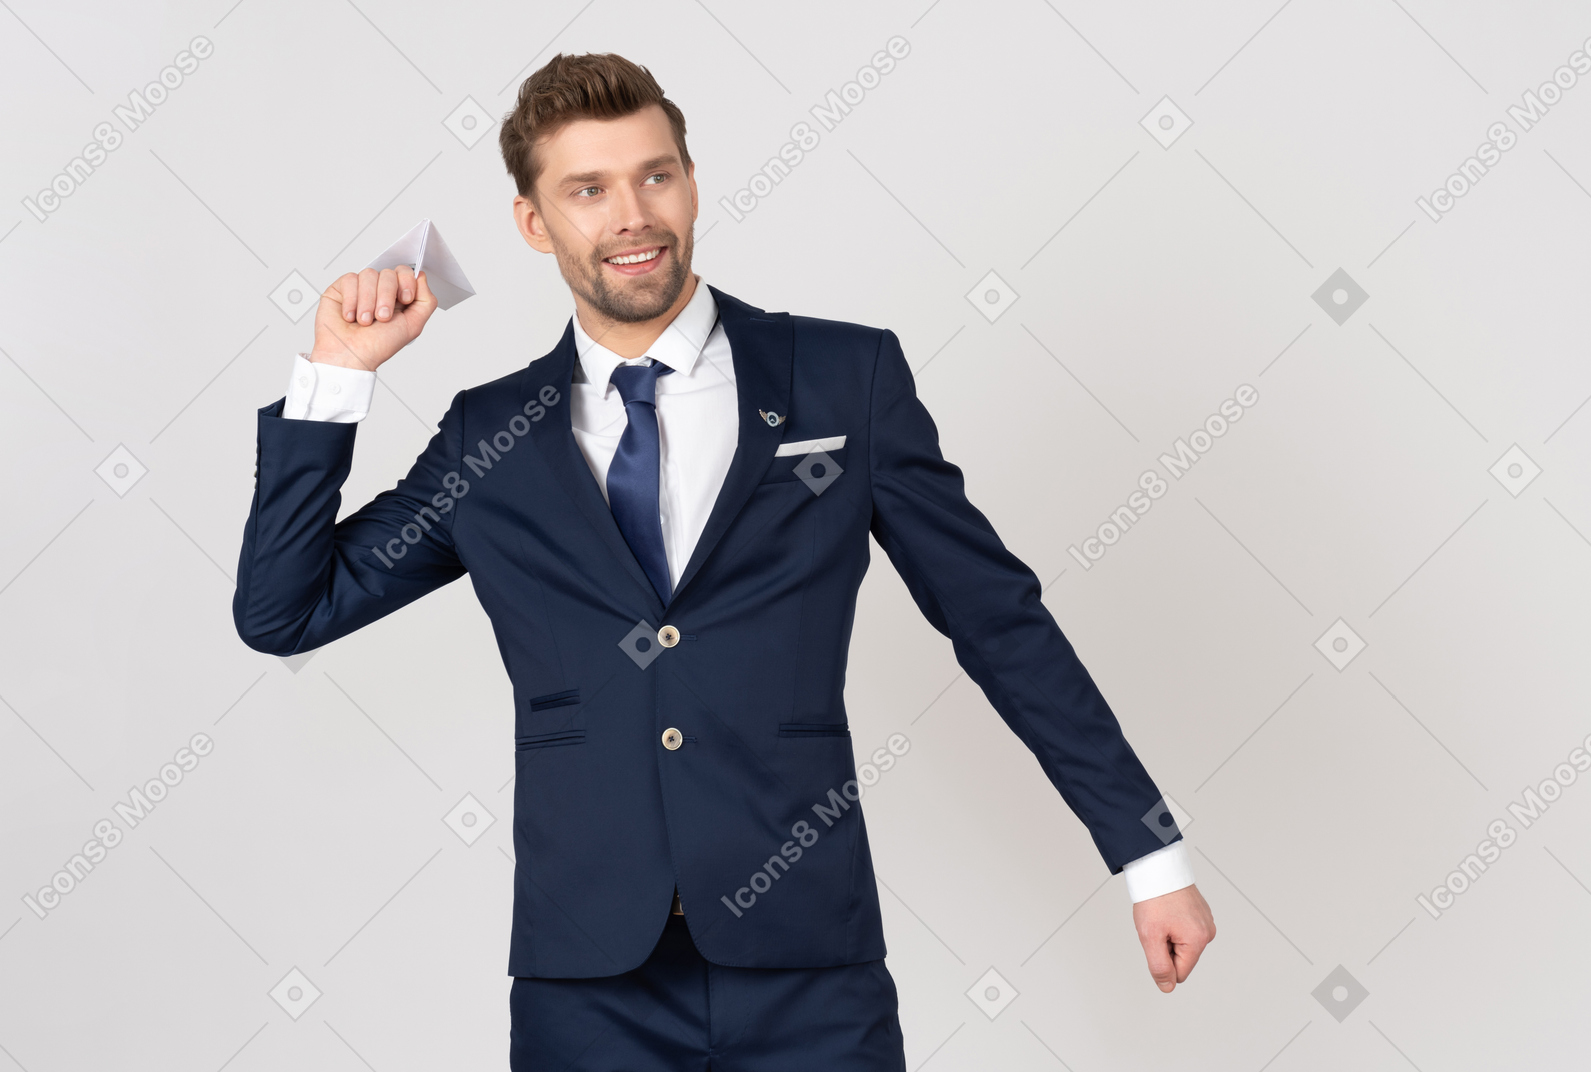 Male flight attendant holding a paper airplane